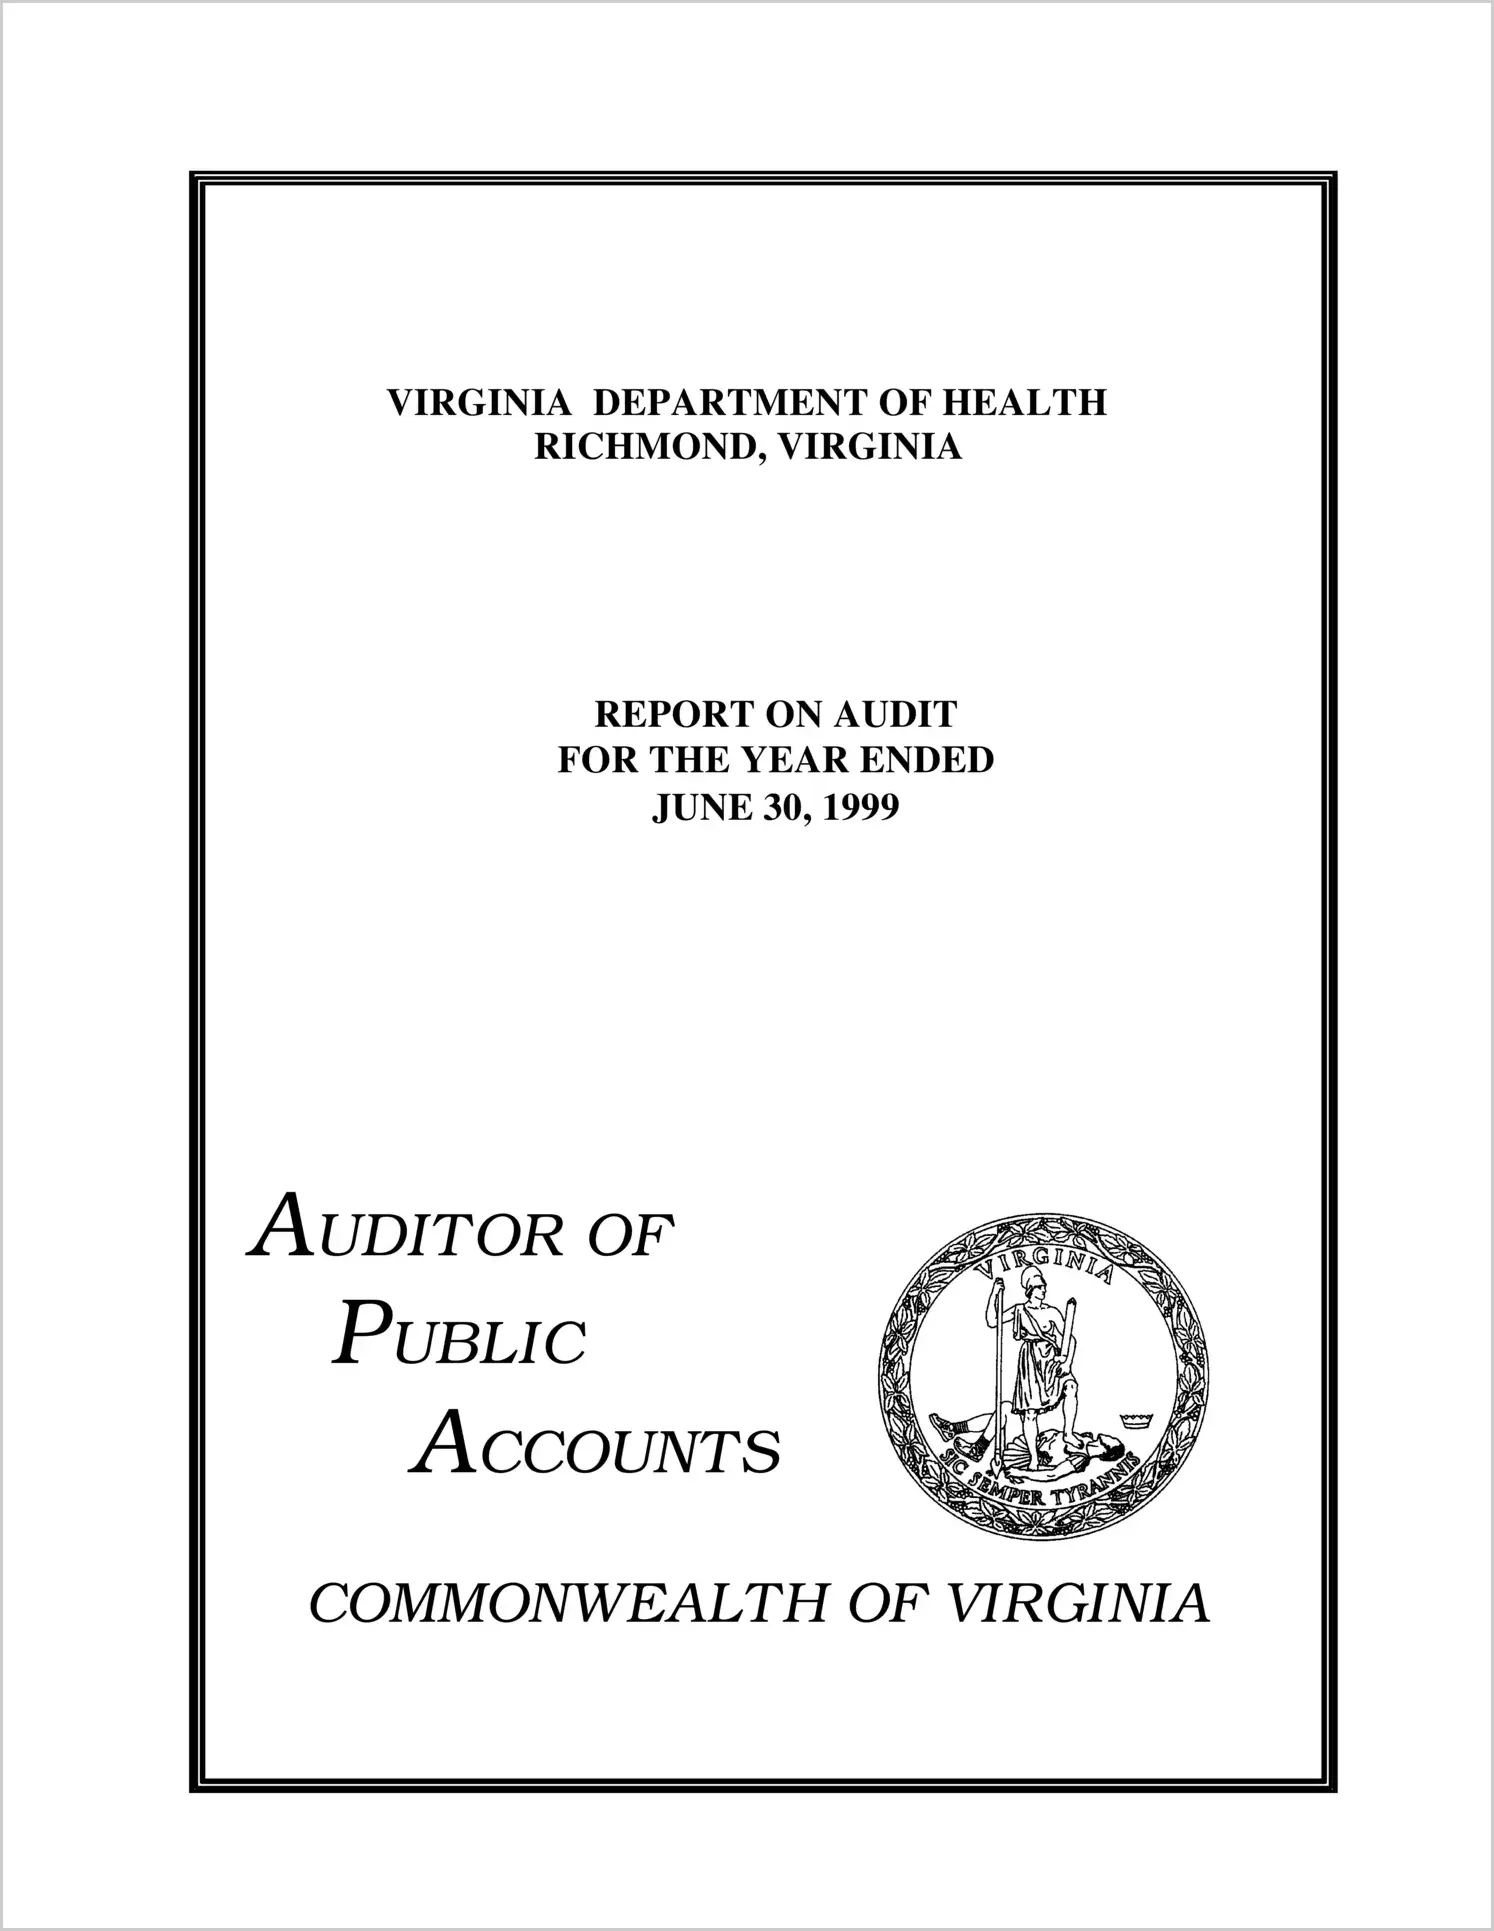 Department of Health for the year ended June 30, 1999